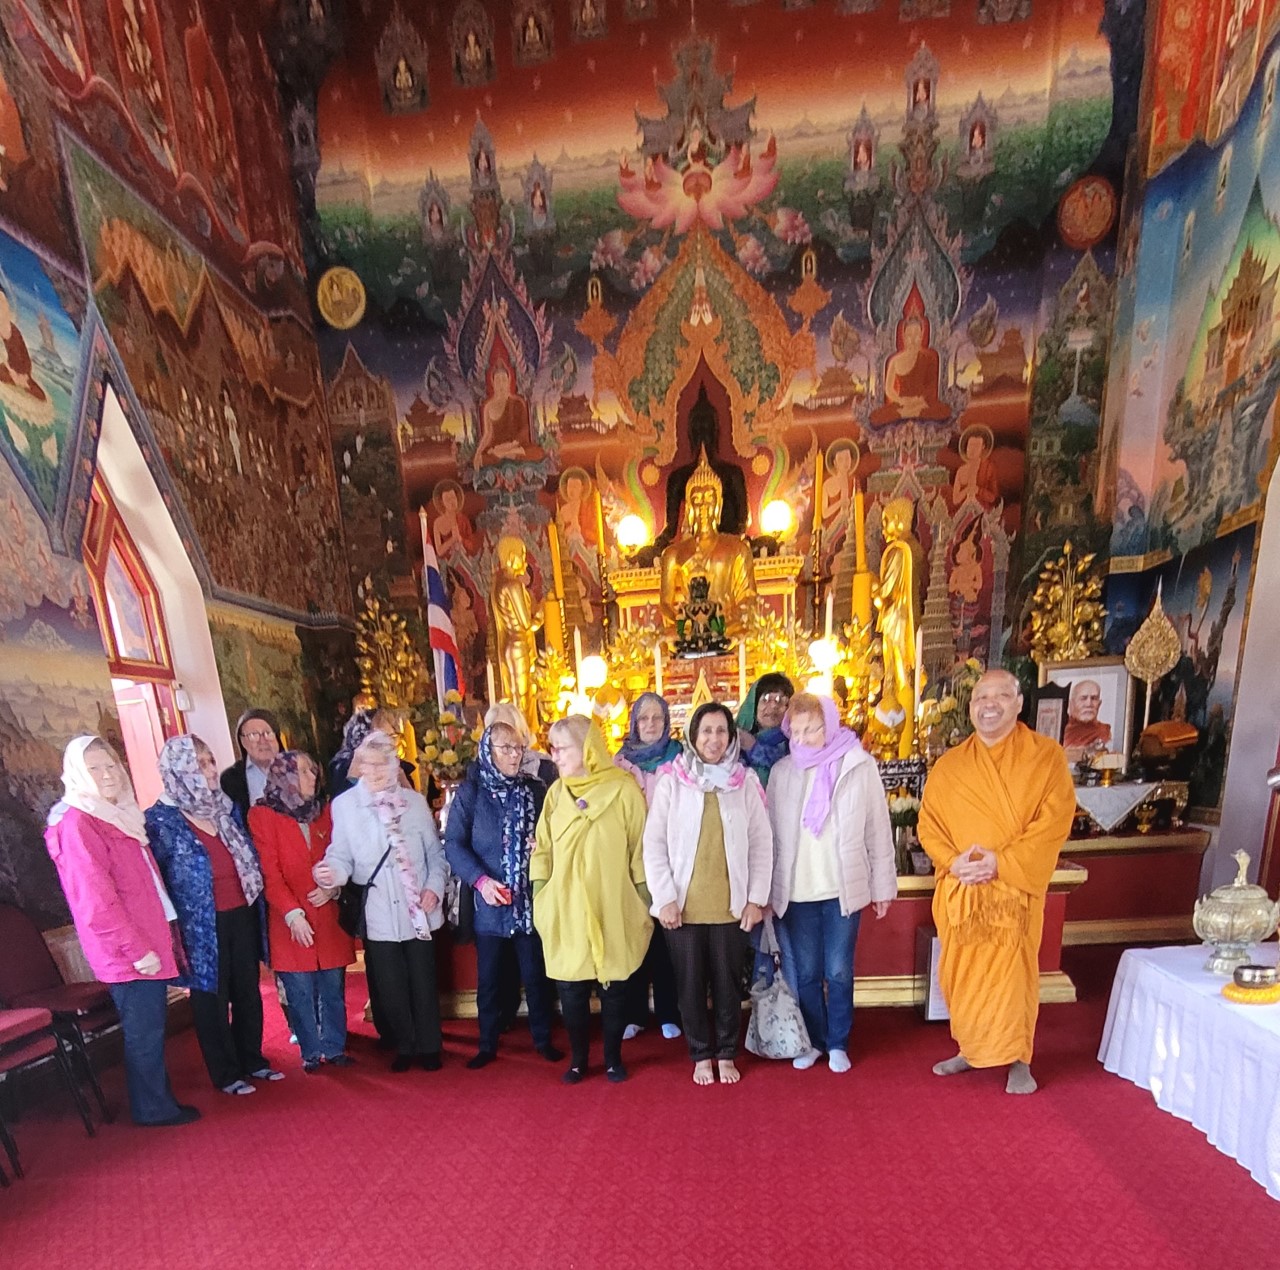 Trip to the Buddhist Temple in Wimbledon